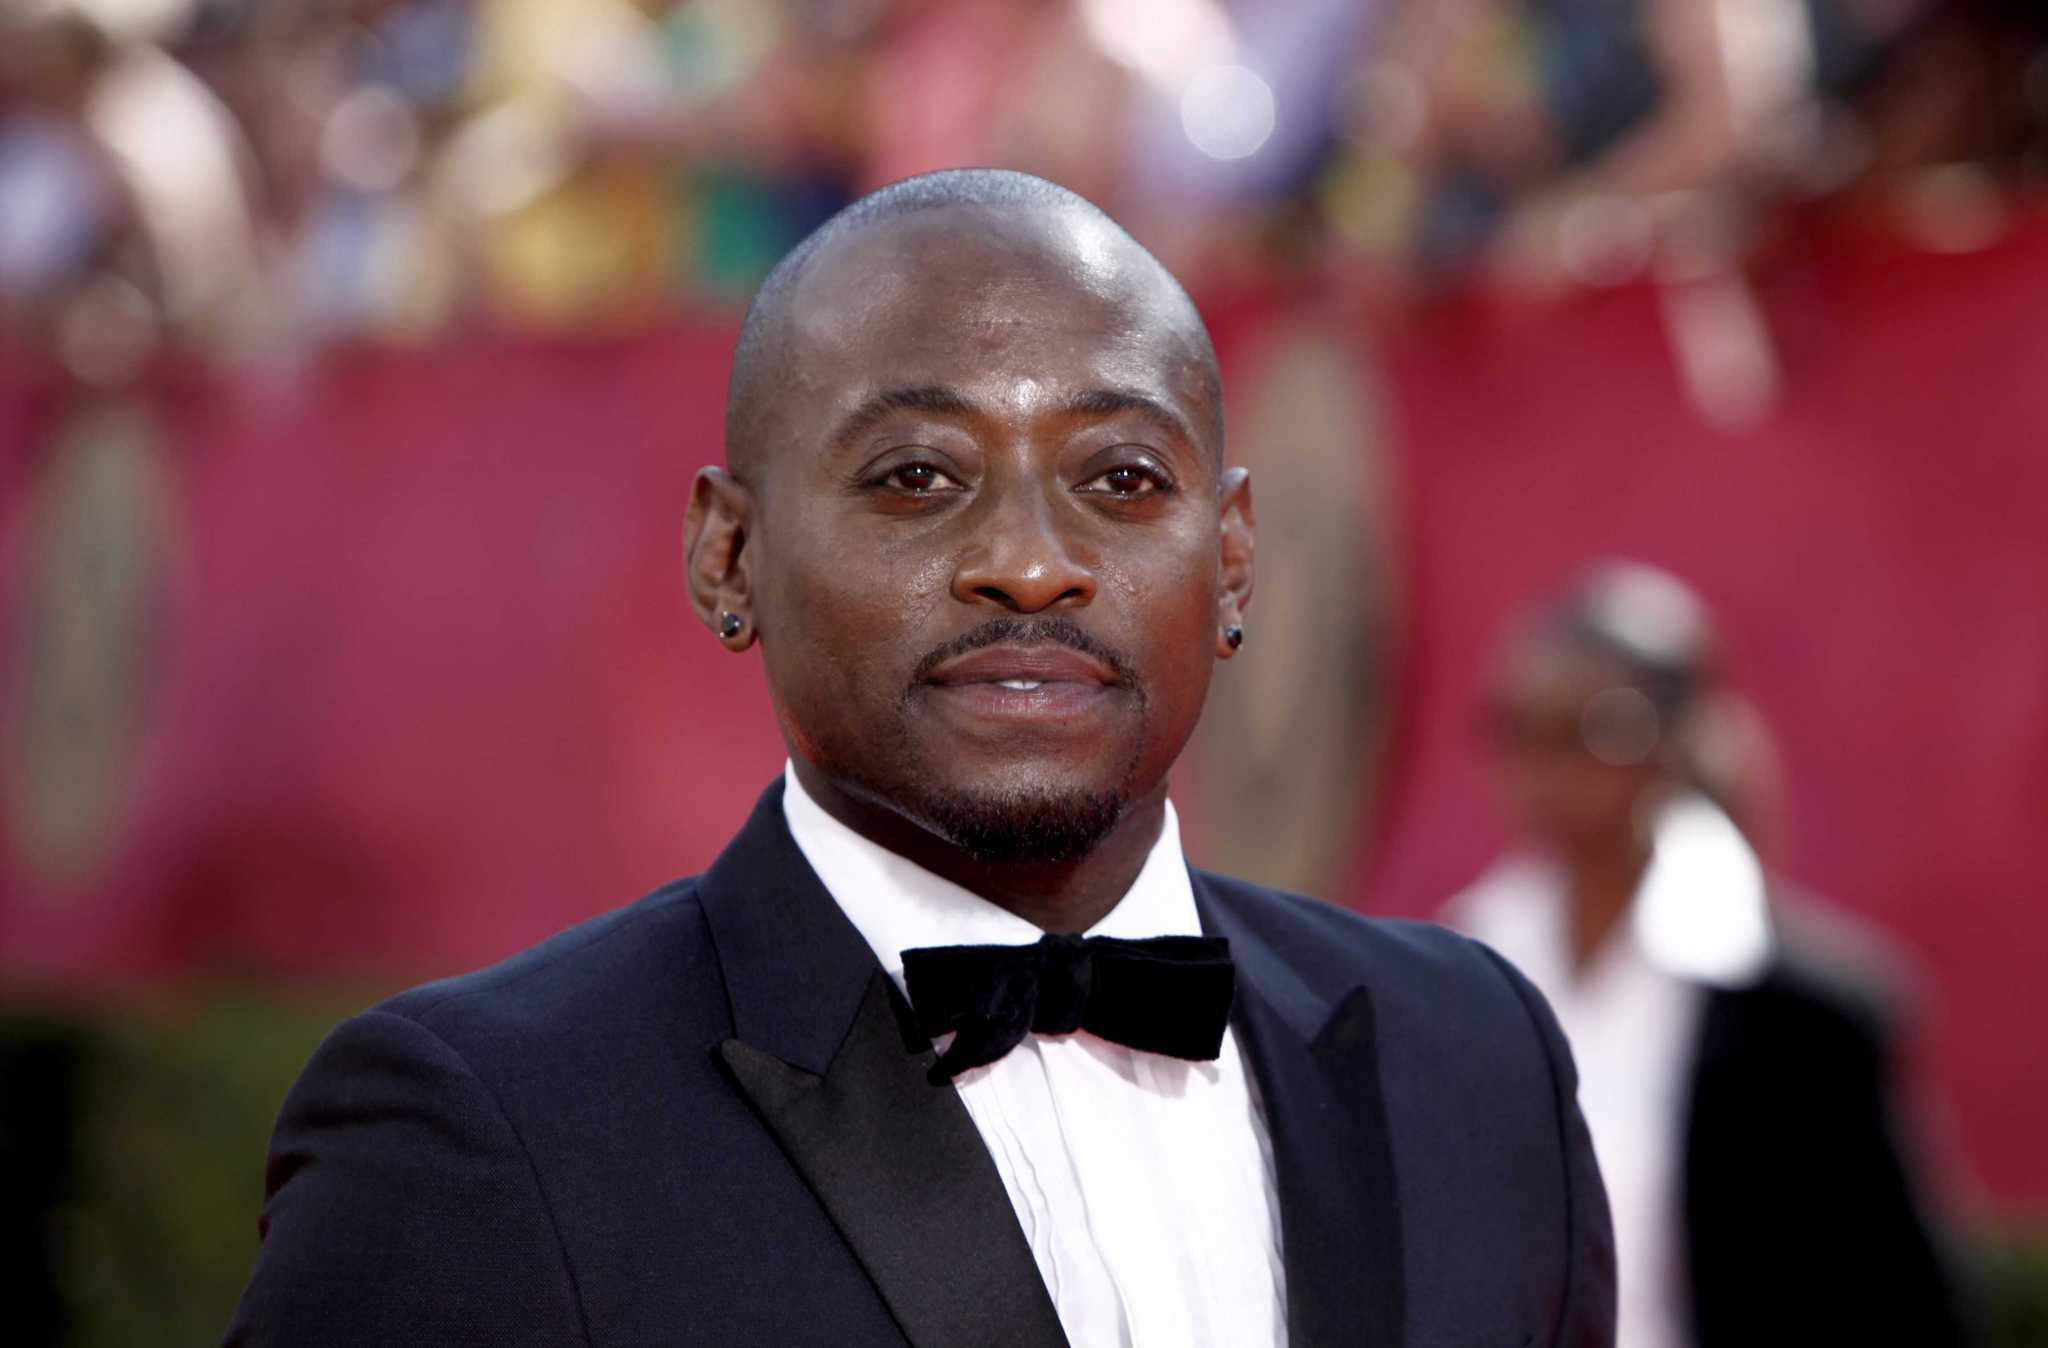 More Pictures Of Omar Epps. omar epps family. 